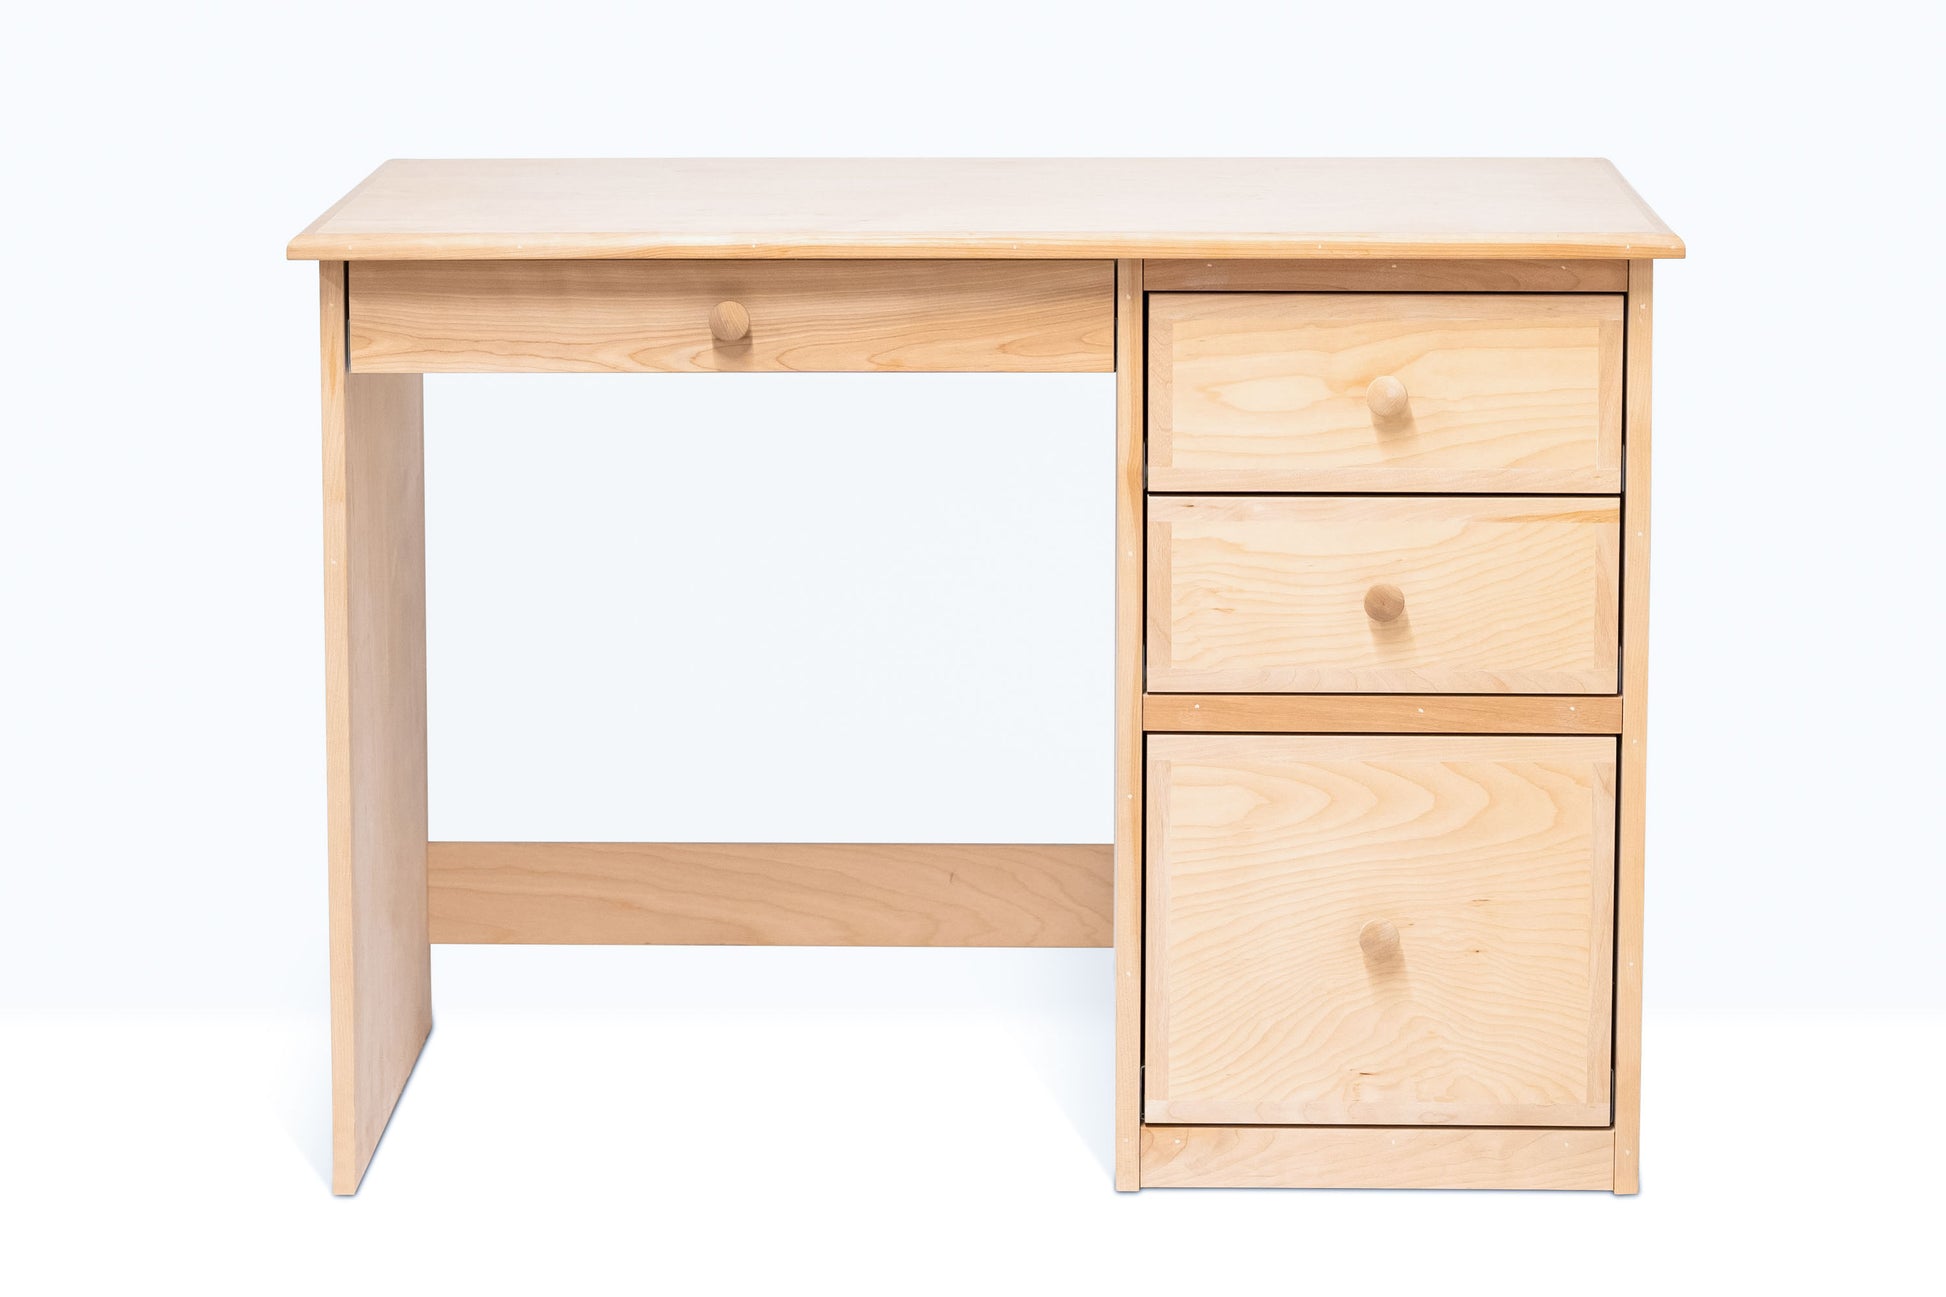 Berkshire Student Desk with Drawers shown in unfinished birch, with four drawers.